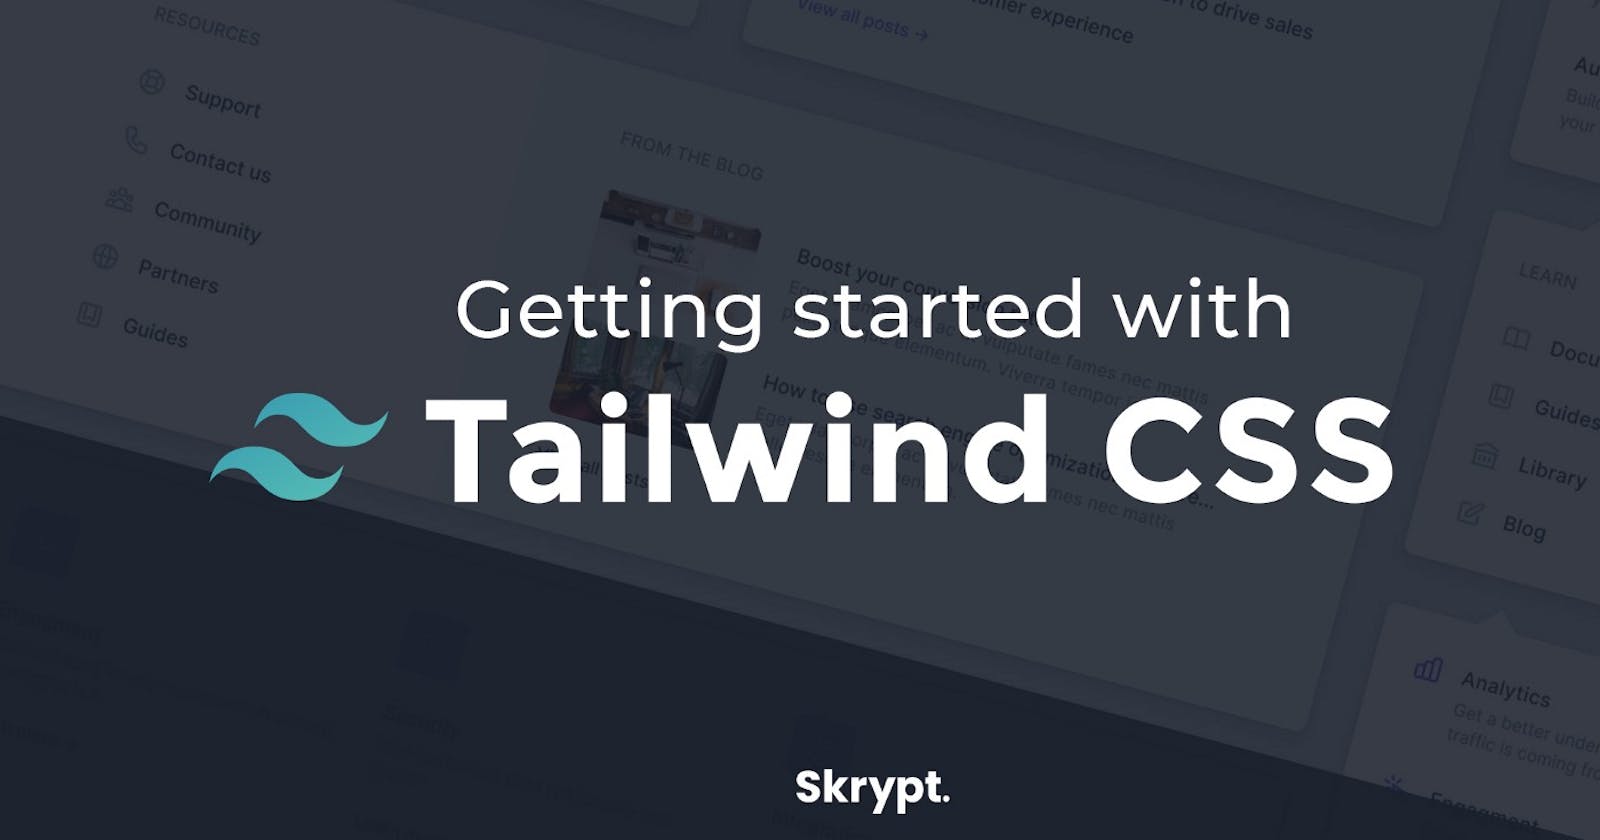 How to Easily Fix "The content option in your Tailwind CSS configuration is missing or empty" Error.